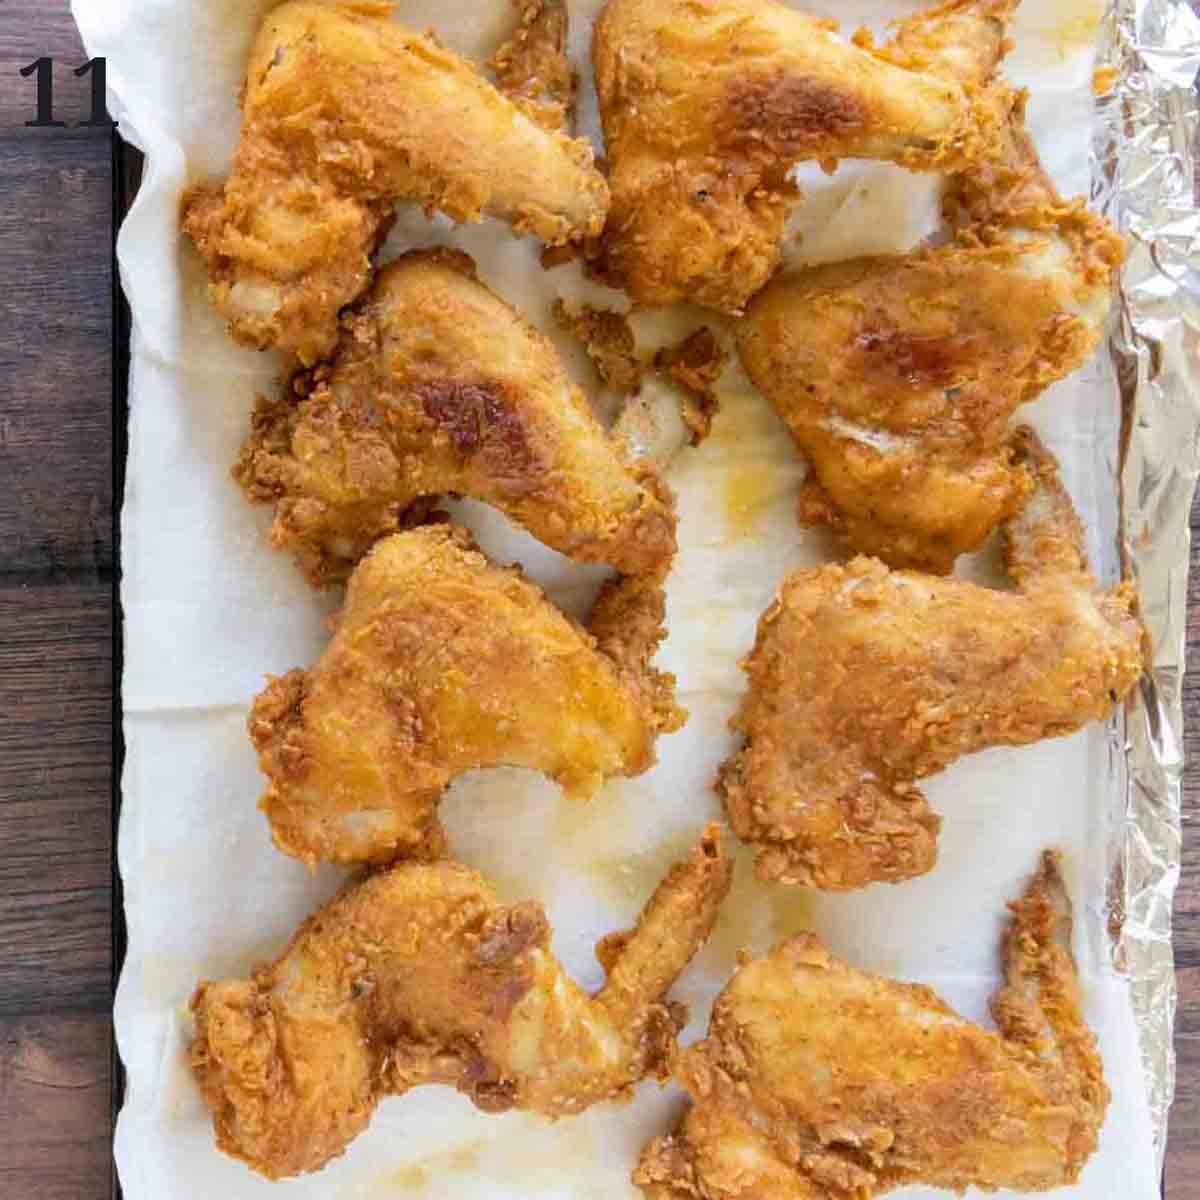 Fried chicken wings draining on paper towels.